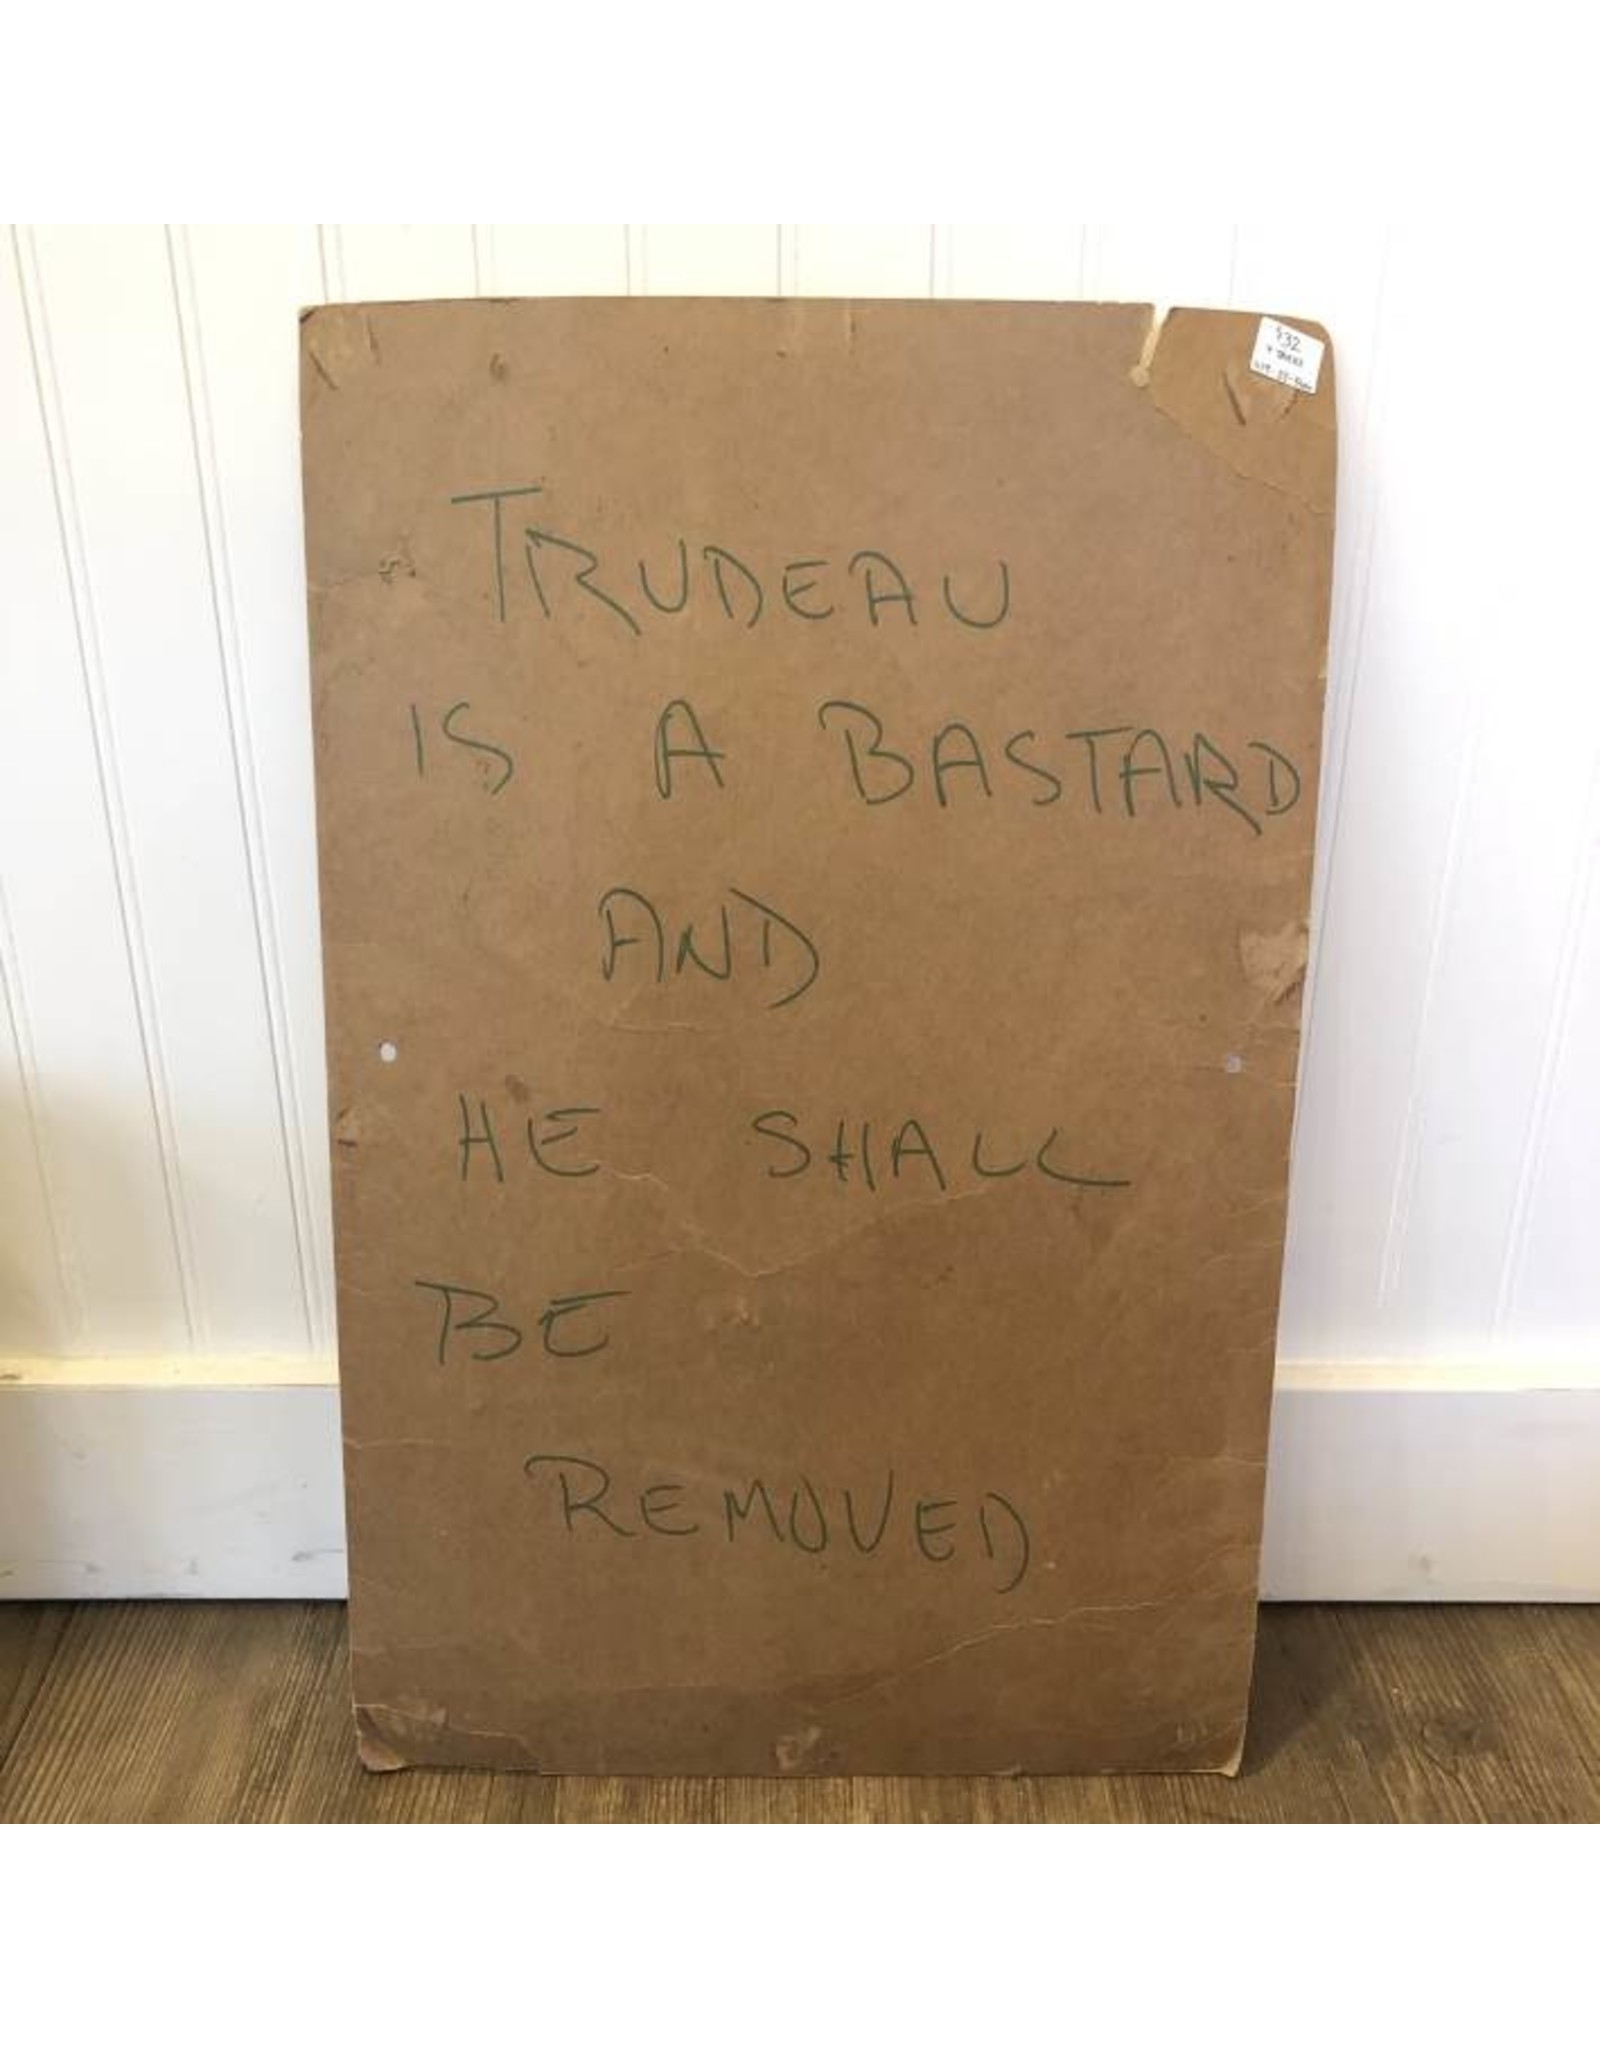 Vancouver Postal Strike poster with anti-Trudeau message on back